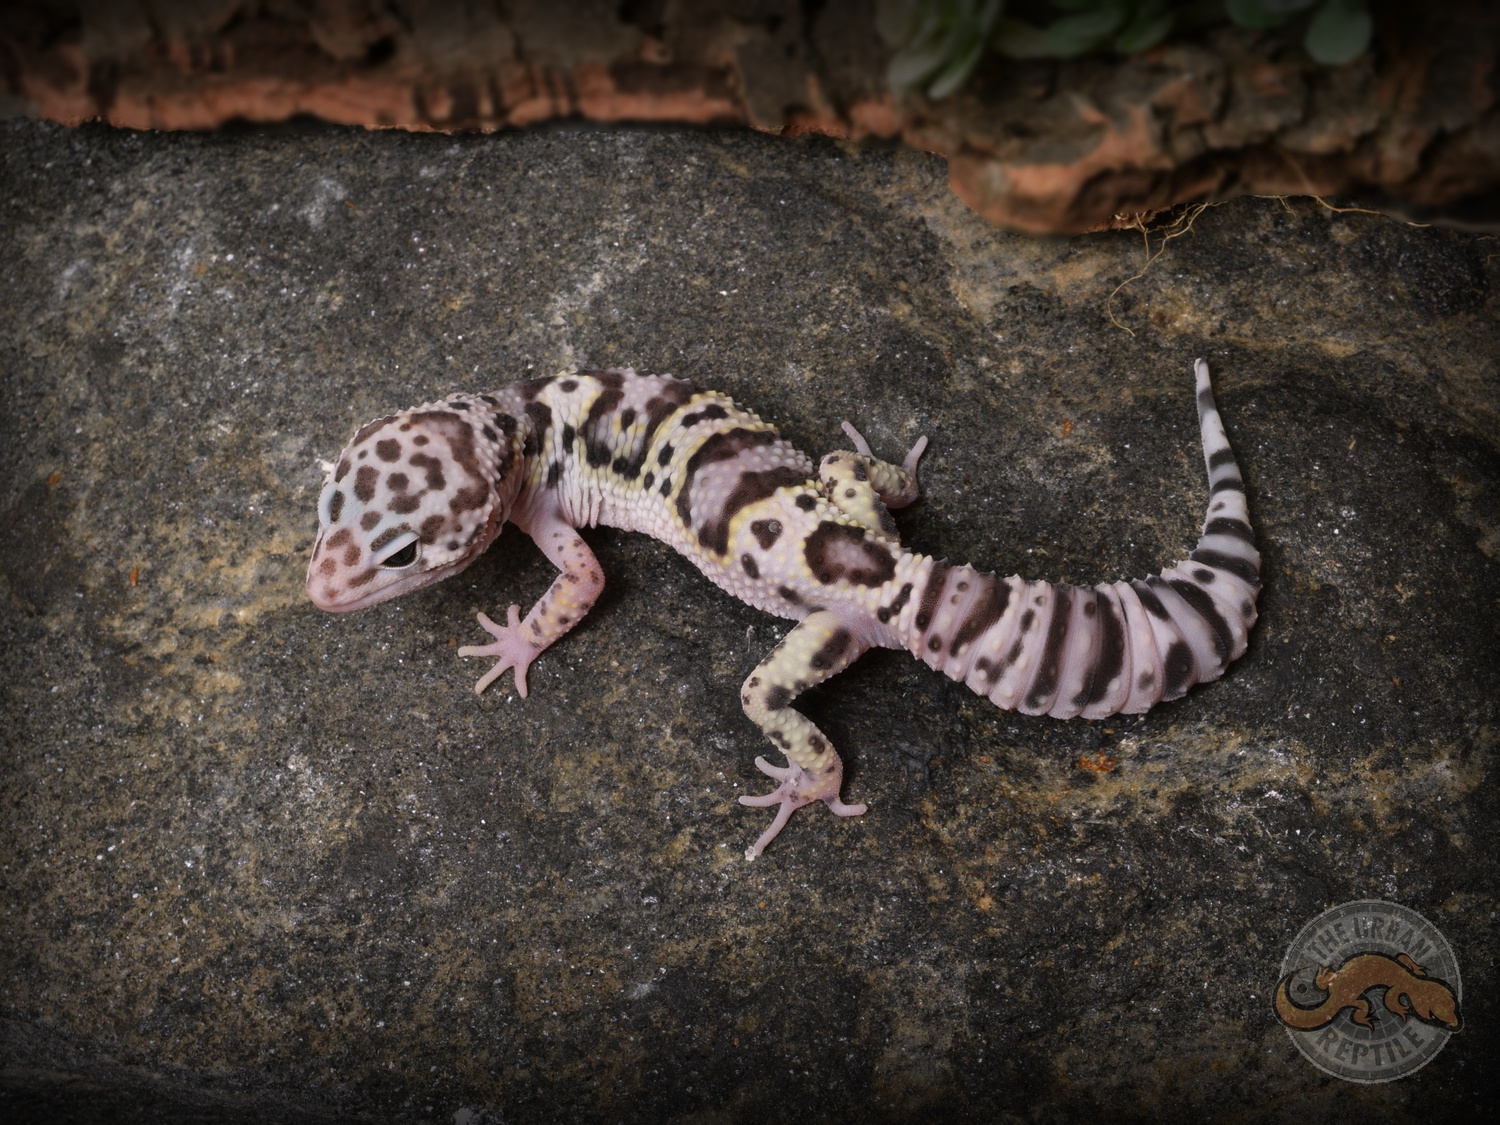 TUG Snow Leopard Gecko by The Urban Reptile